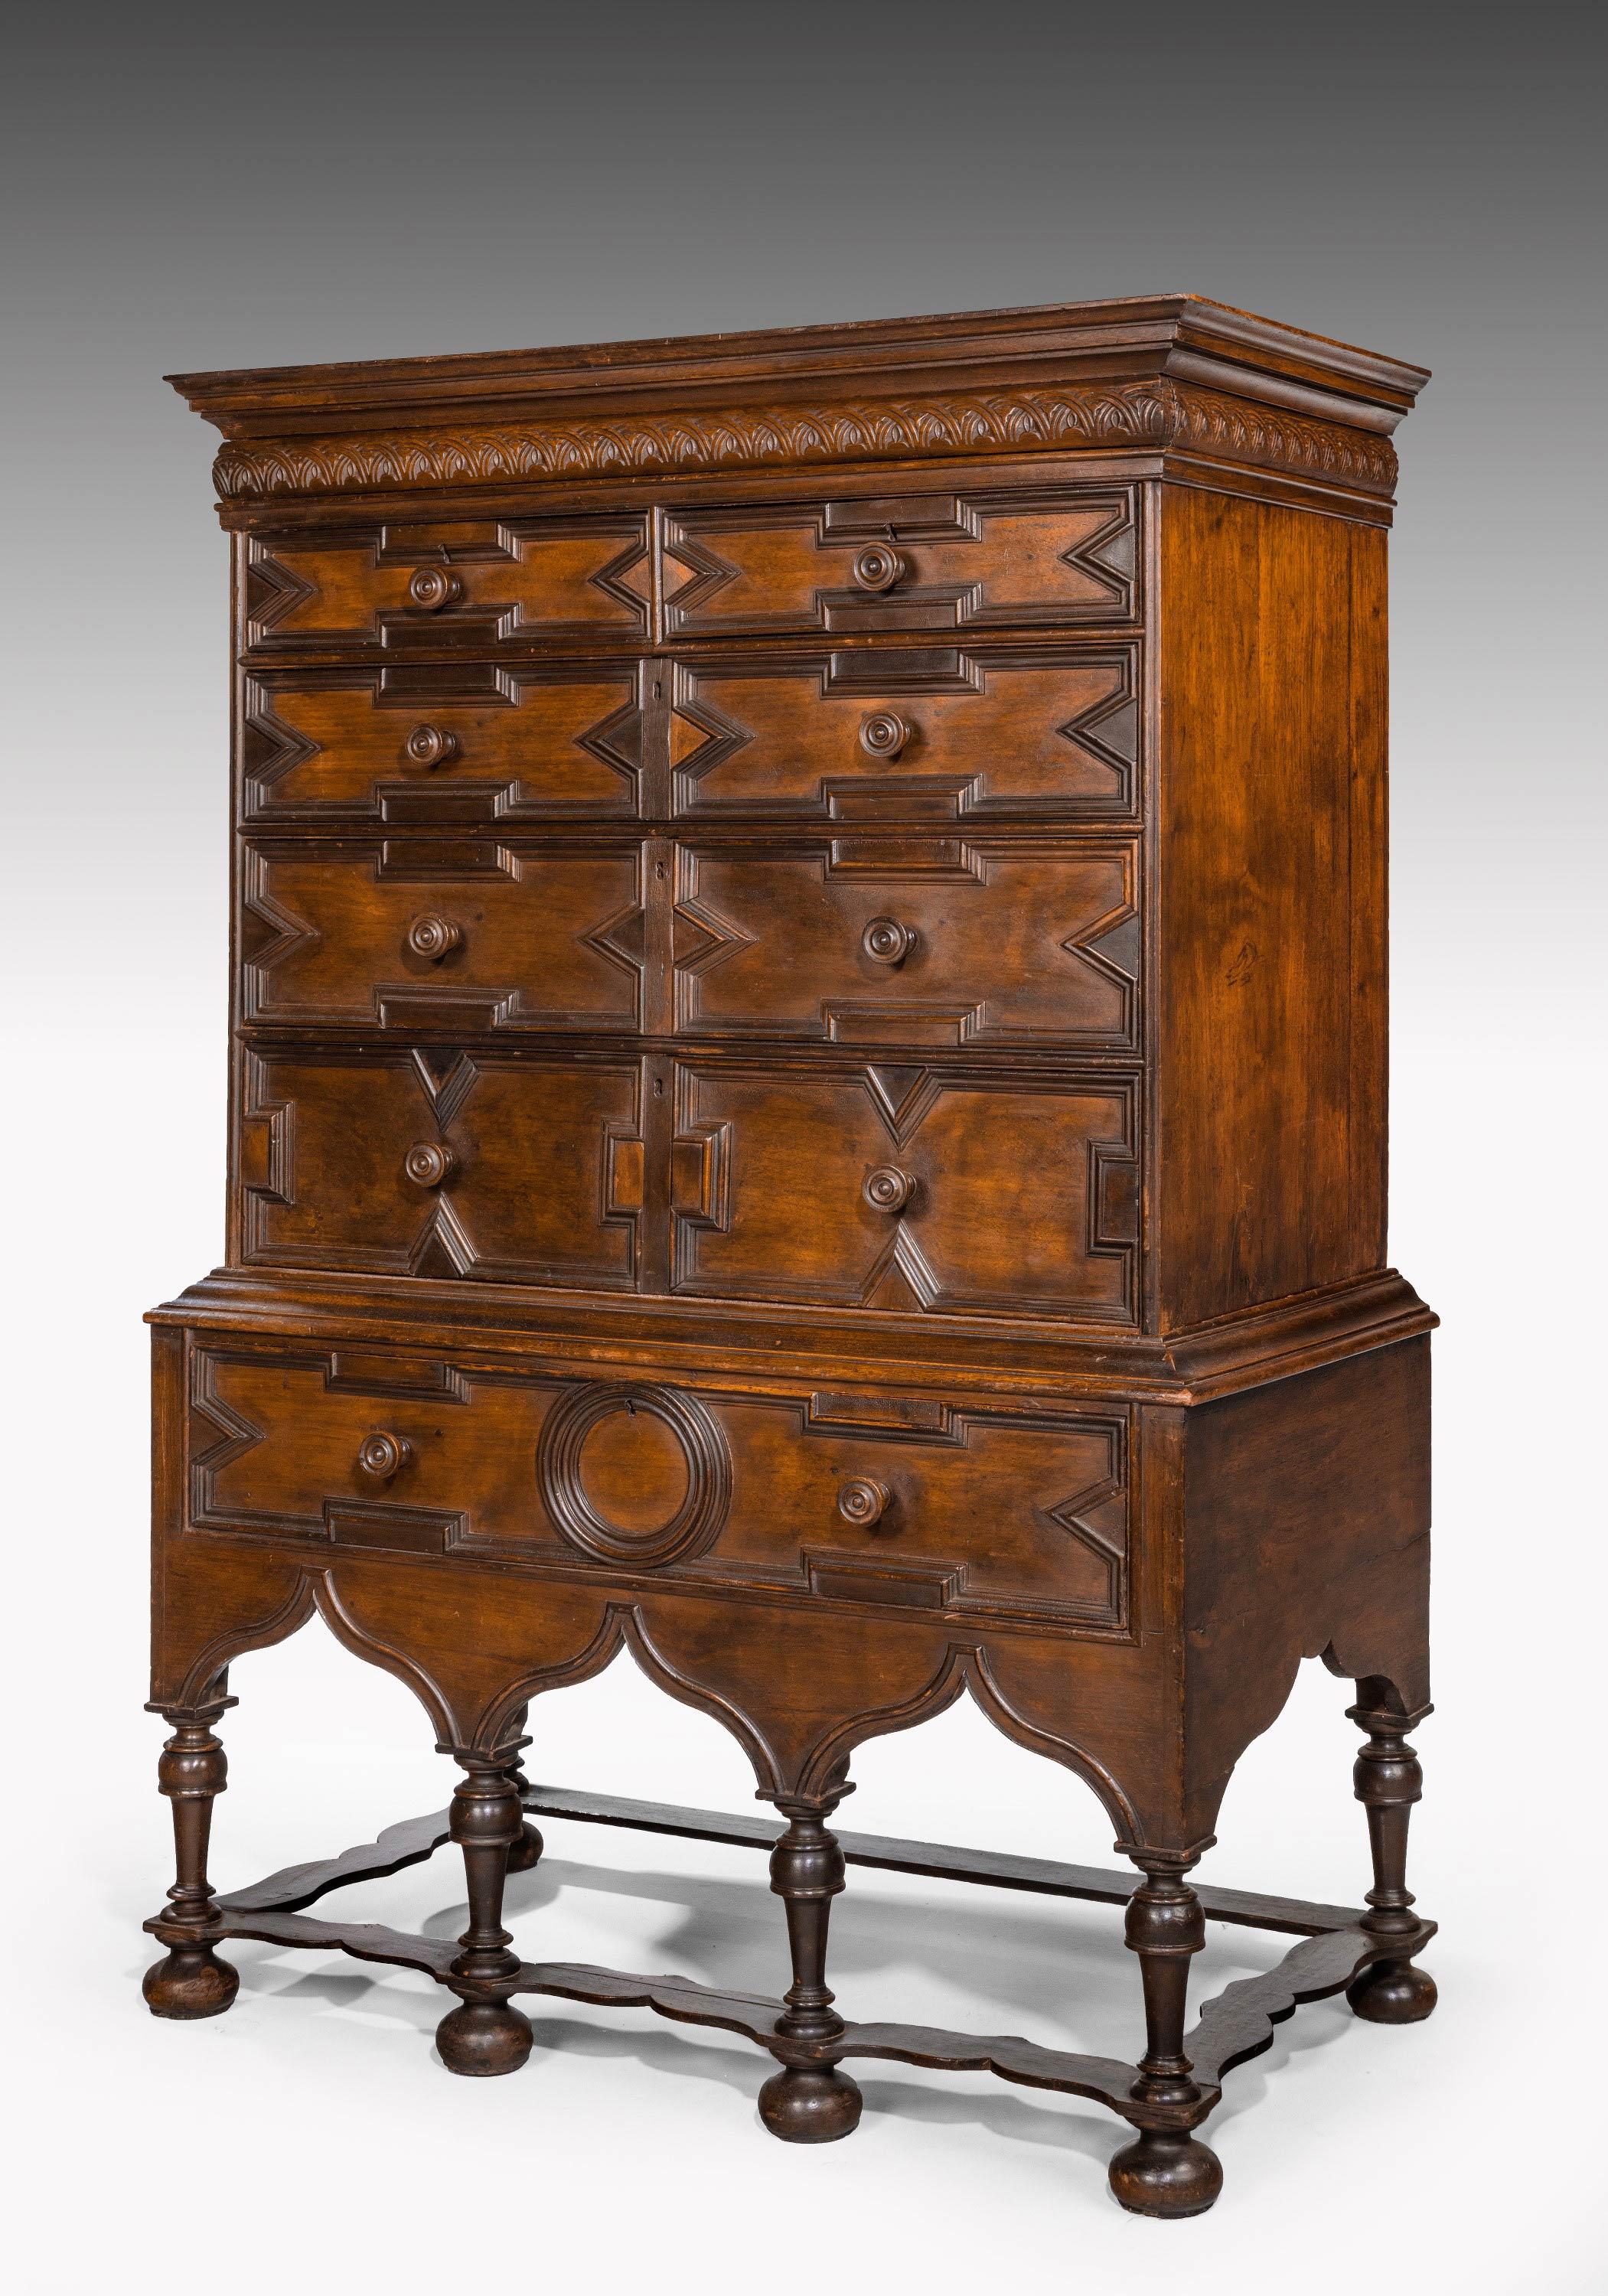 18th Century Rare William and Mary Period Solid Walnut Chest on Stand